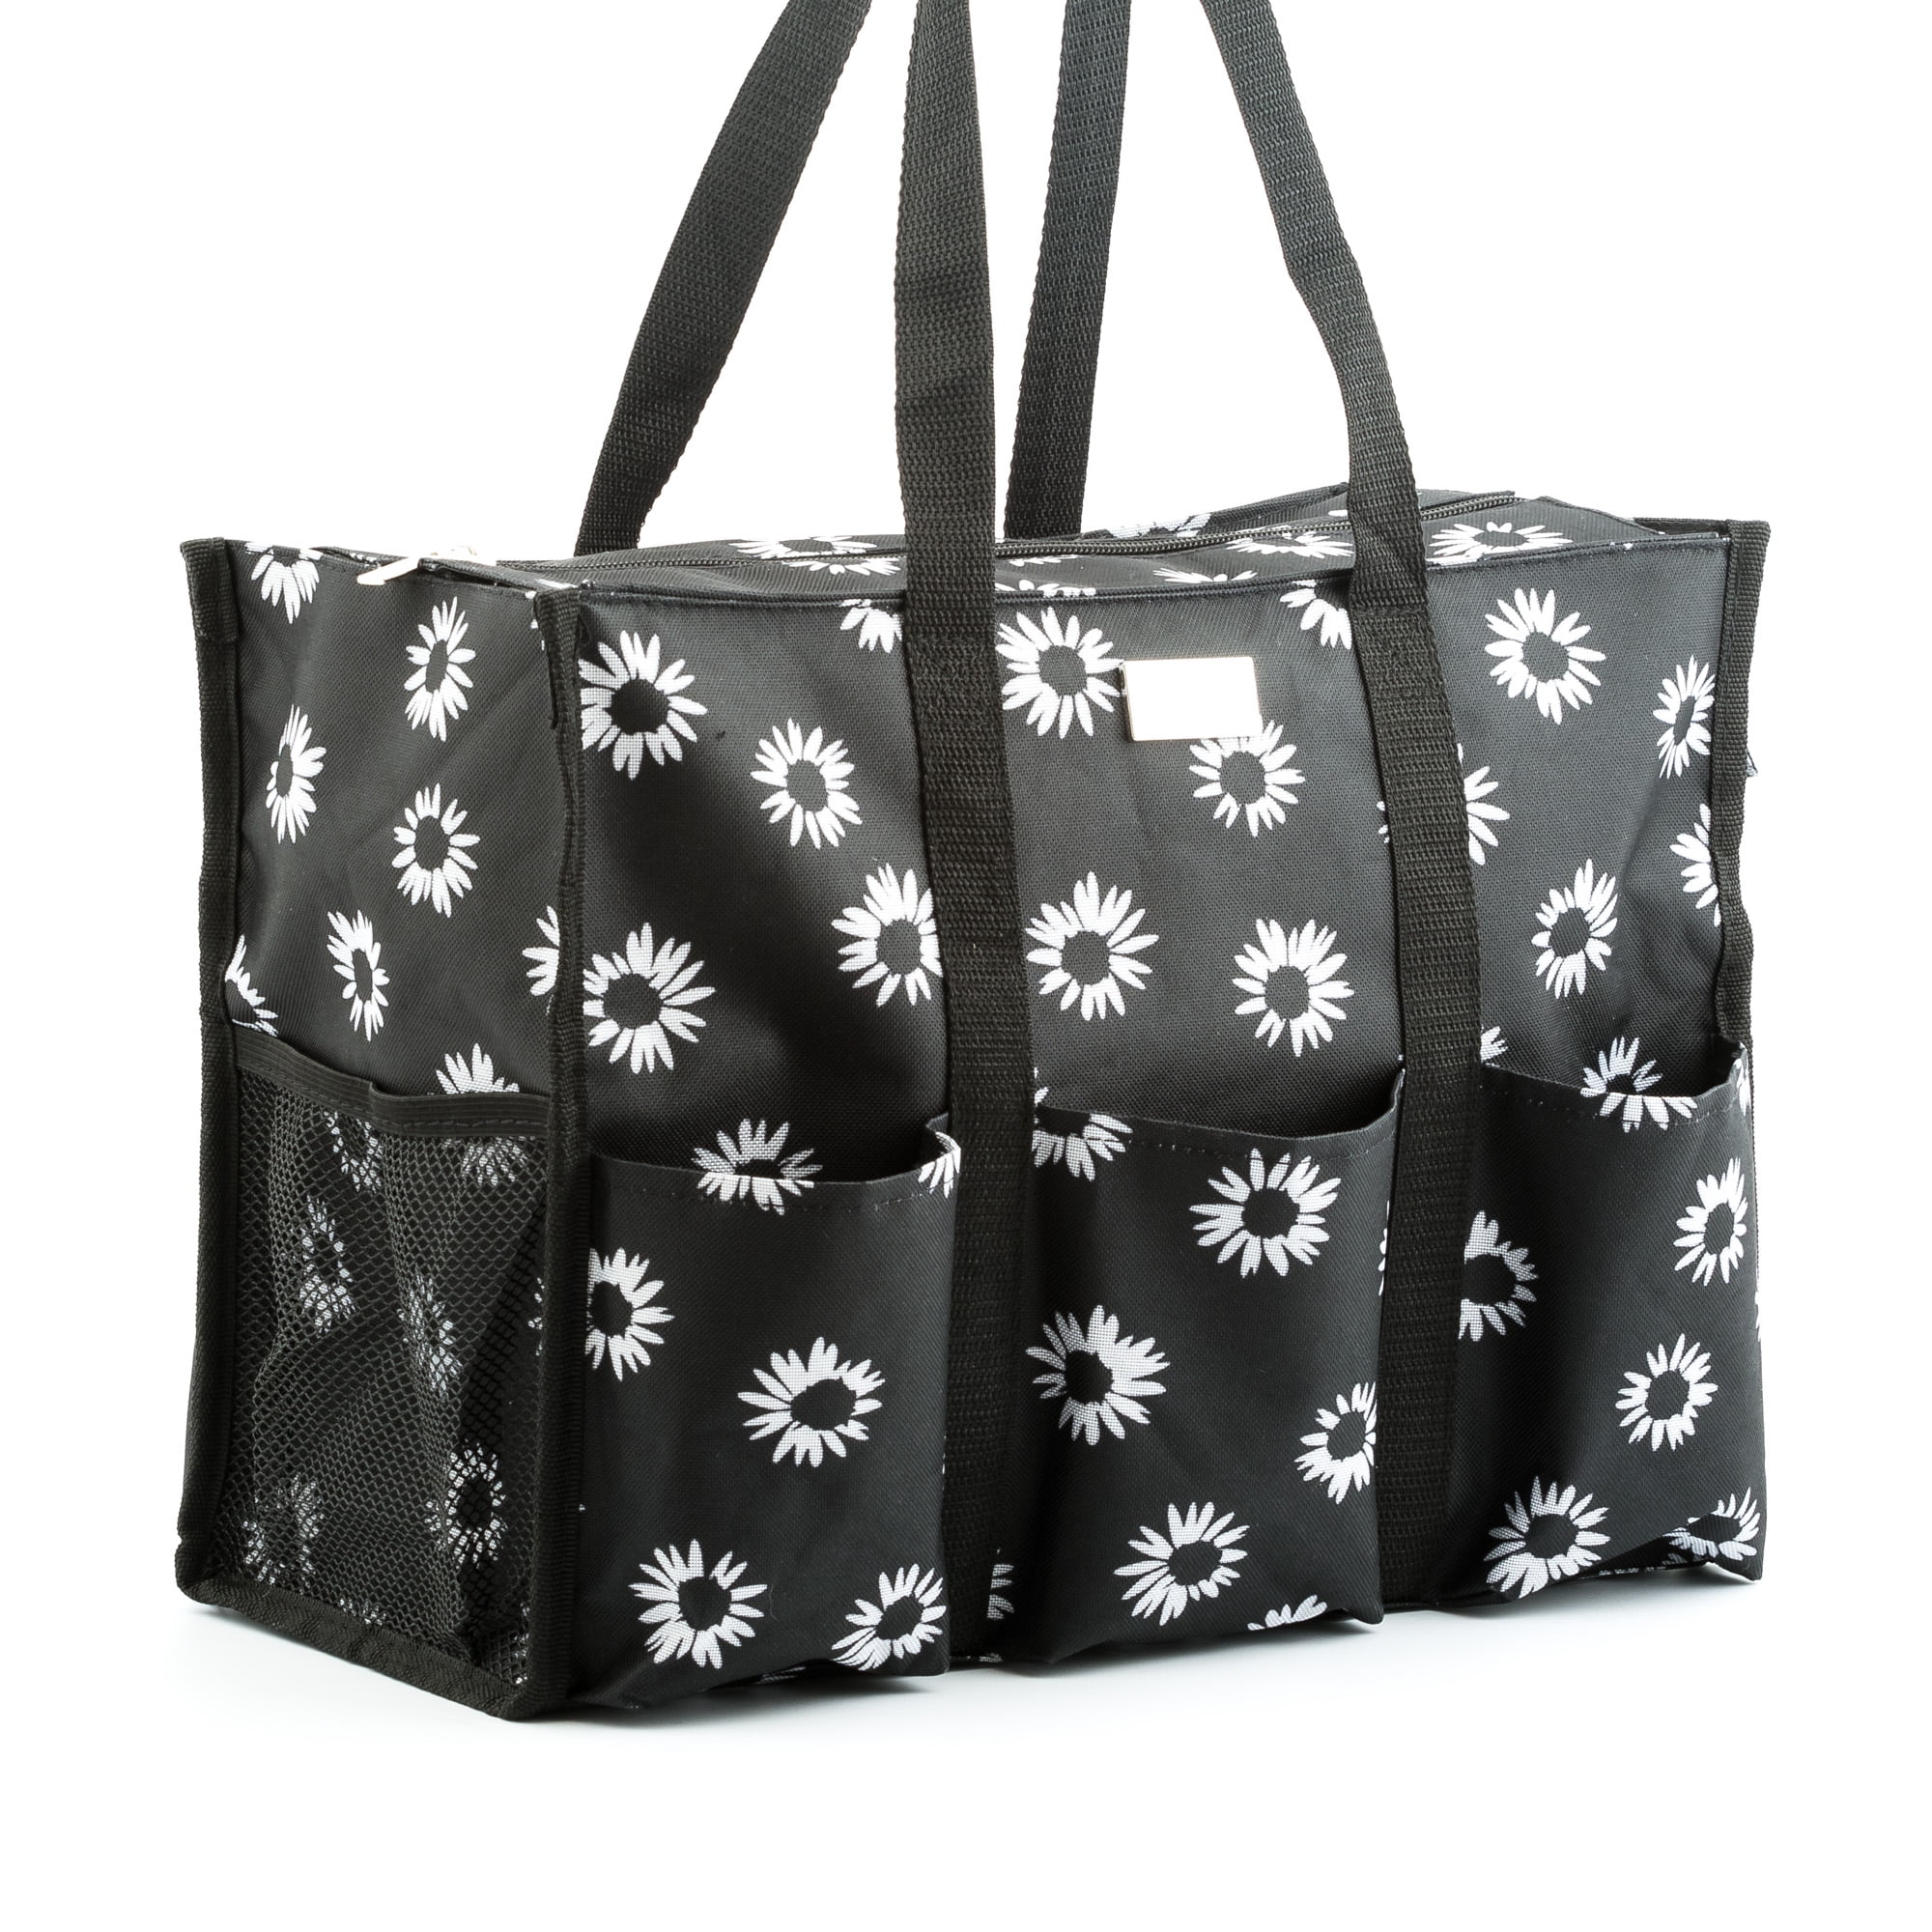 Pursetti Zip-Top Organizing Utility Tote Bag with Multiple